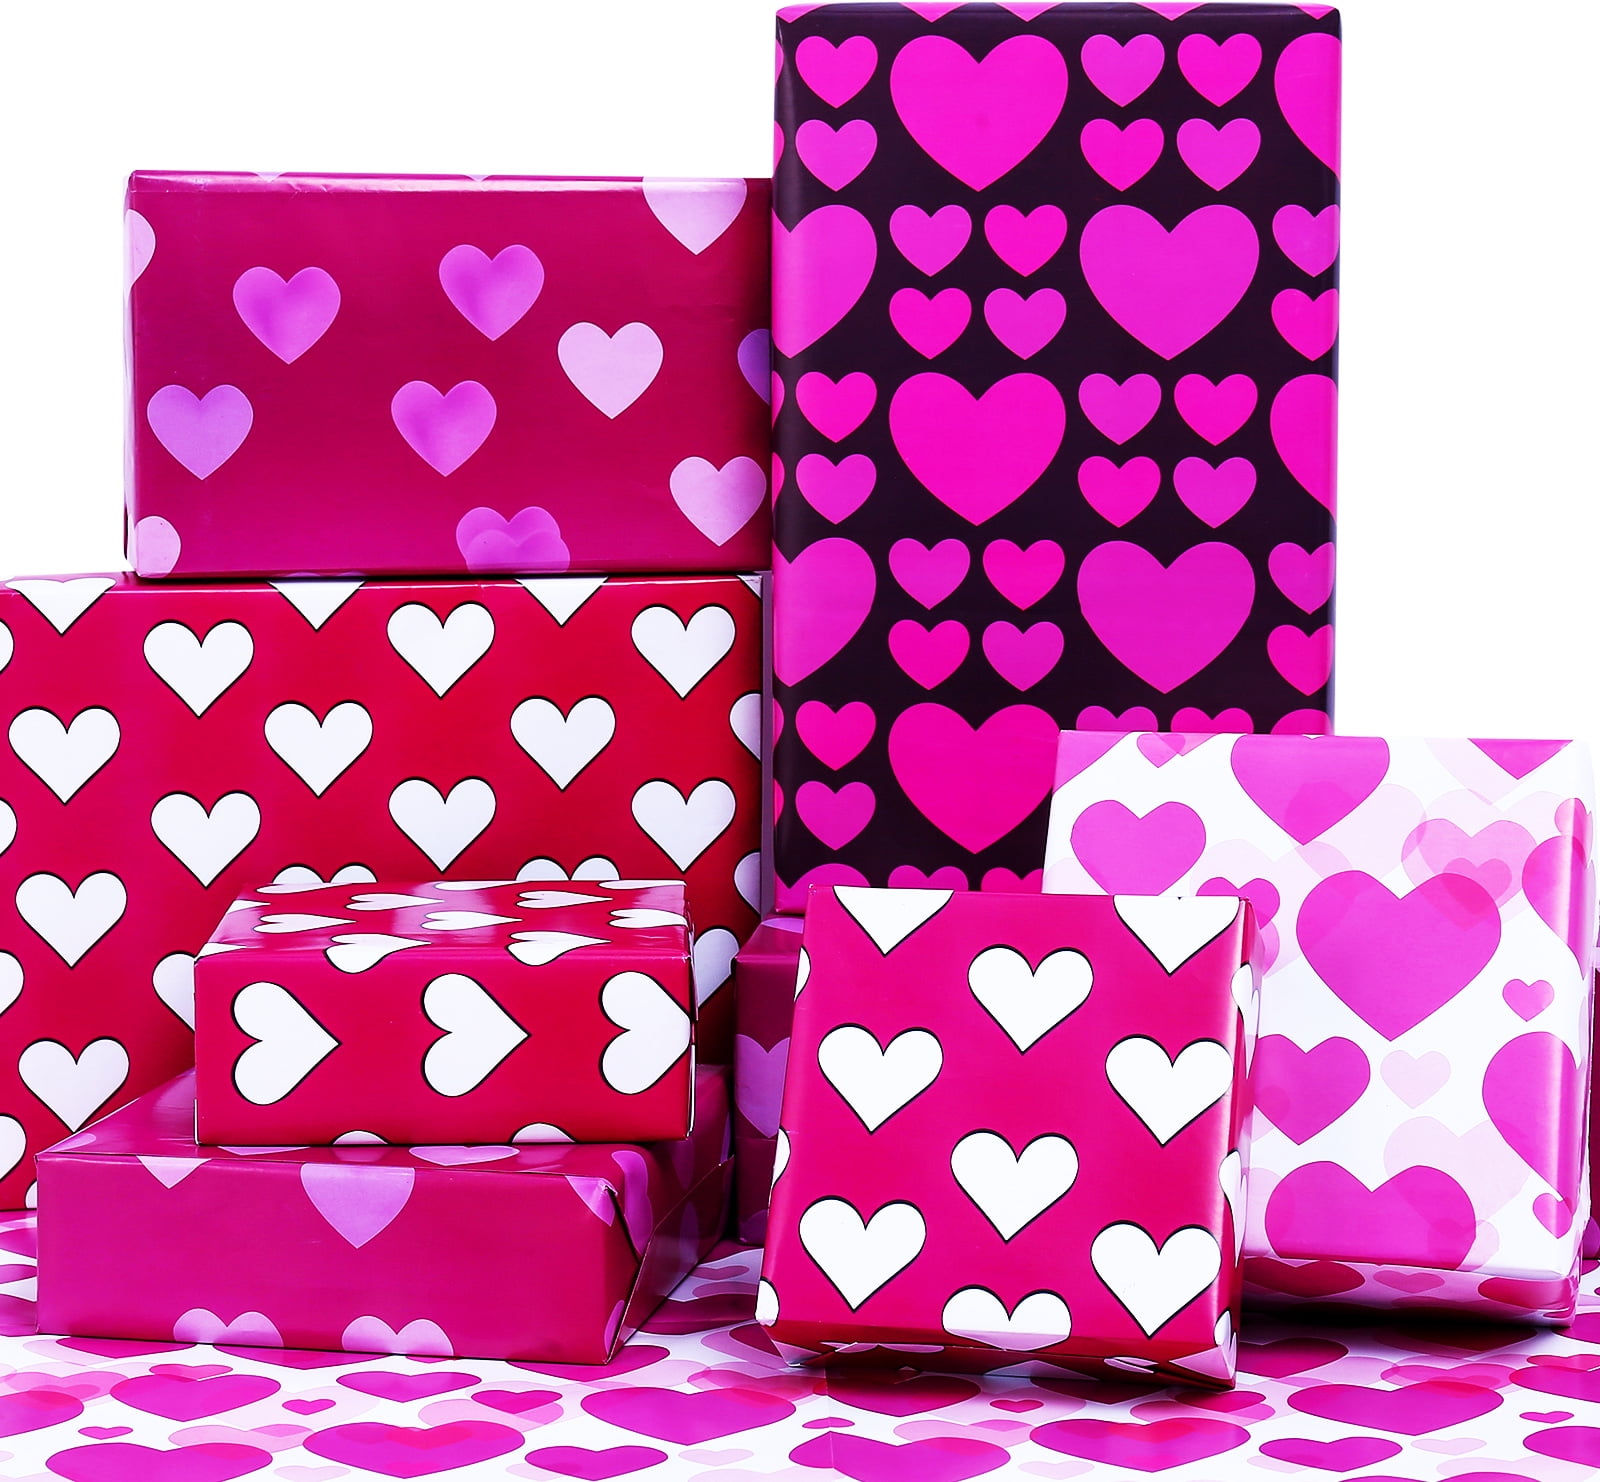 20cm x 5 meter Pink Air Bubble Roll Love Heart-shaped Party Favors Gifts Packing  Foam Roll Gift Box Packing Filler Wedding Decor - AliExpress